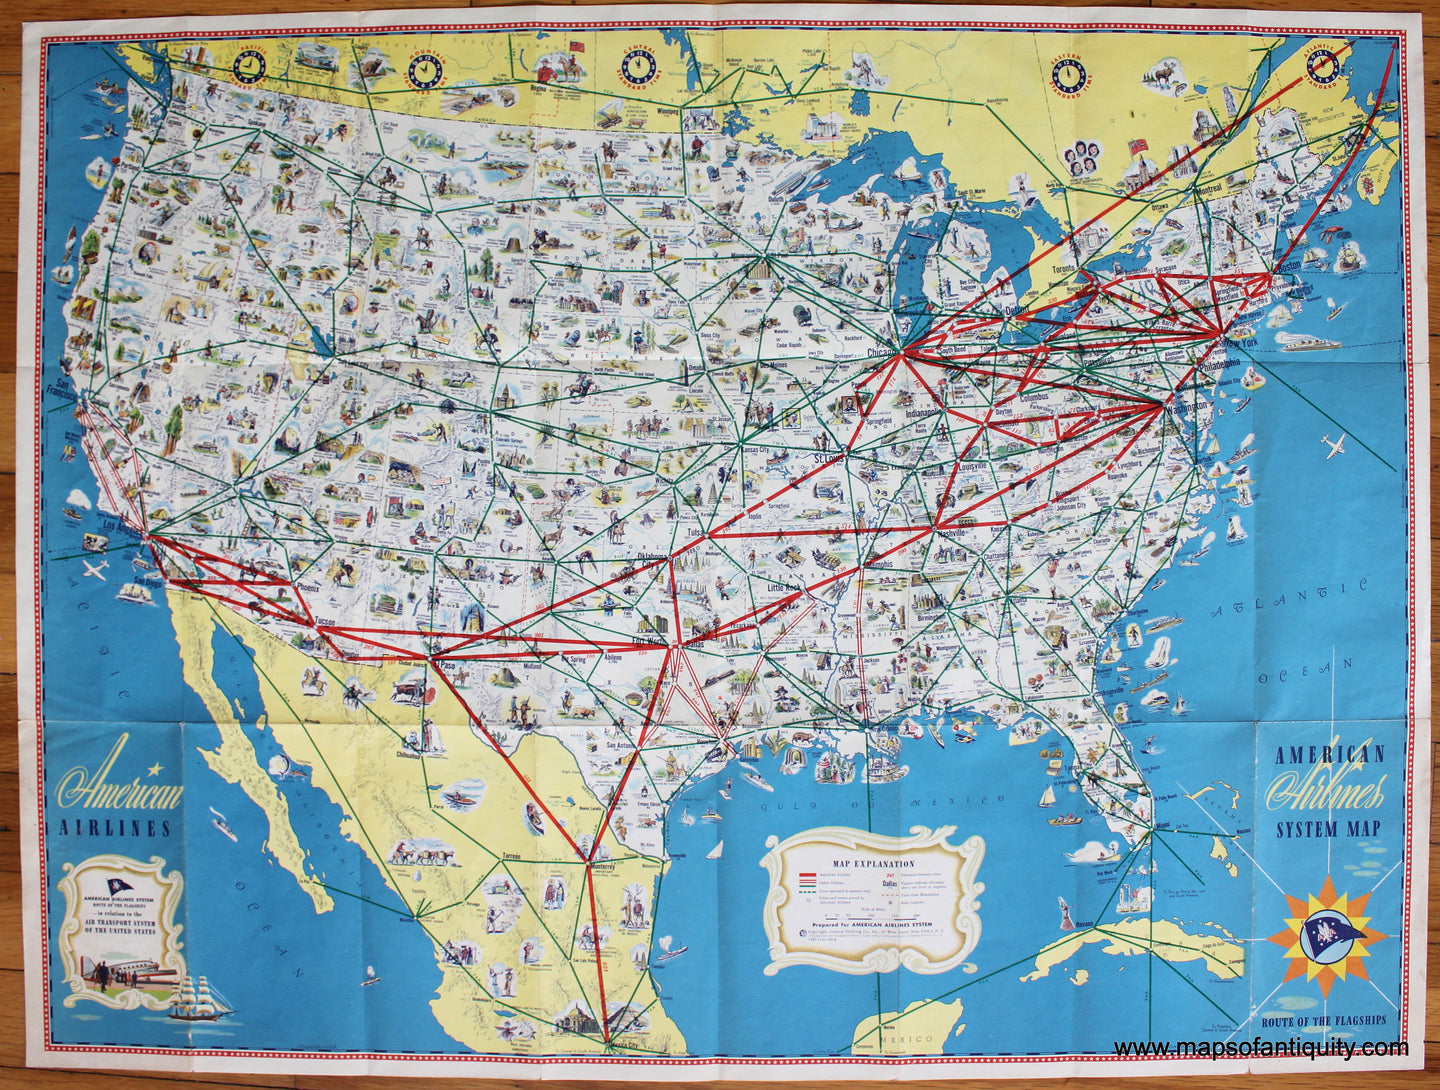 Antique-Printed-Color-Pictorial-Map-American-Airlines-System-Map-c.-1950-American-Airlines-1900s-20th-century-Maps-of-Antiquity